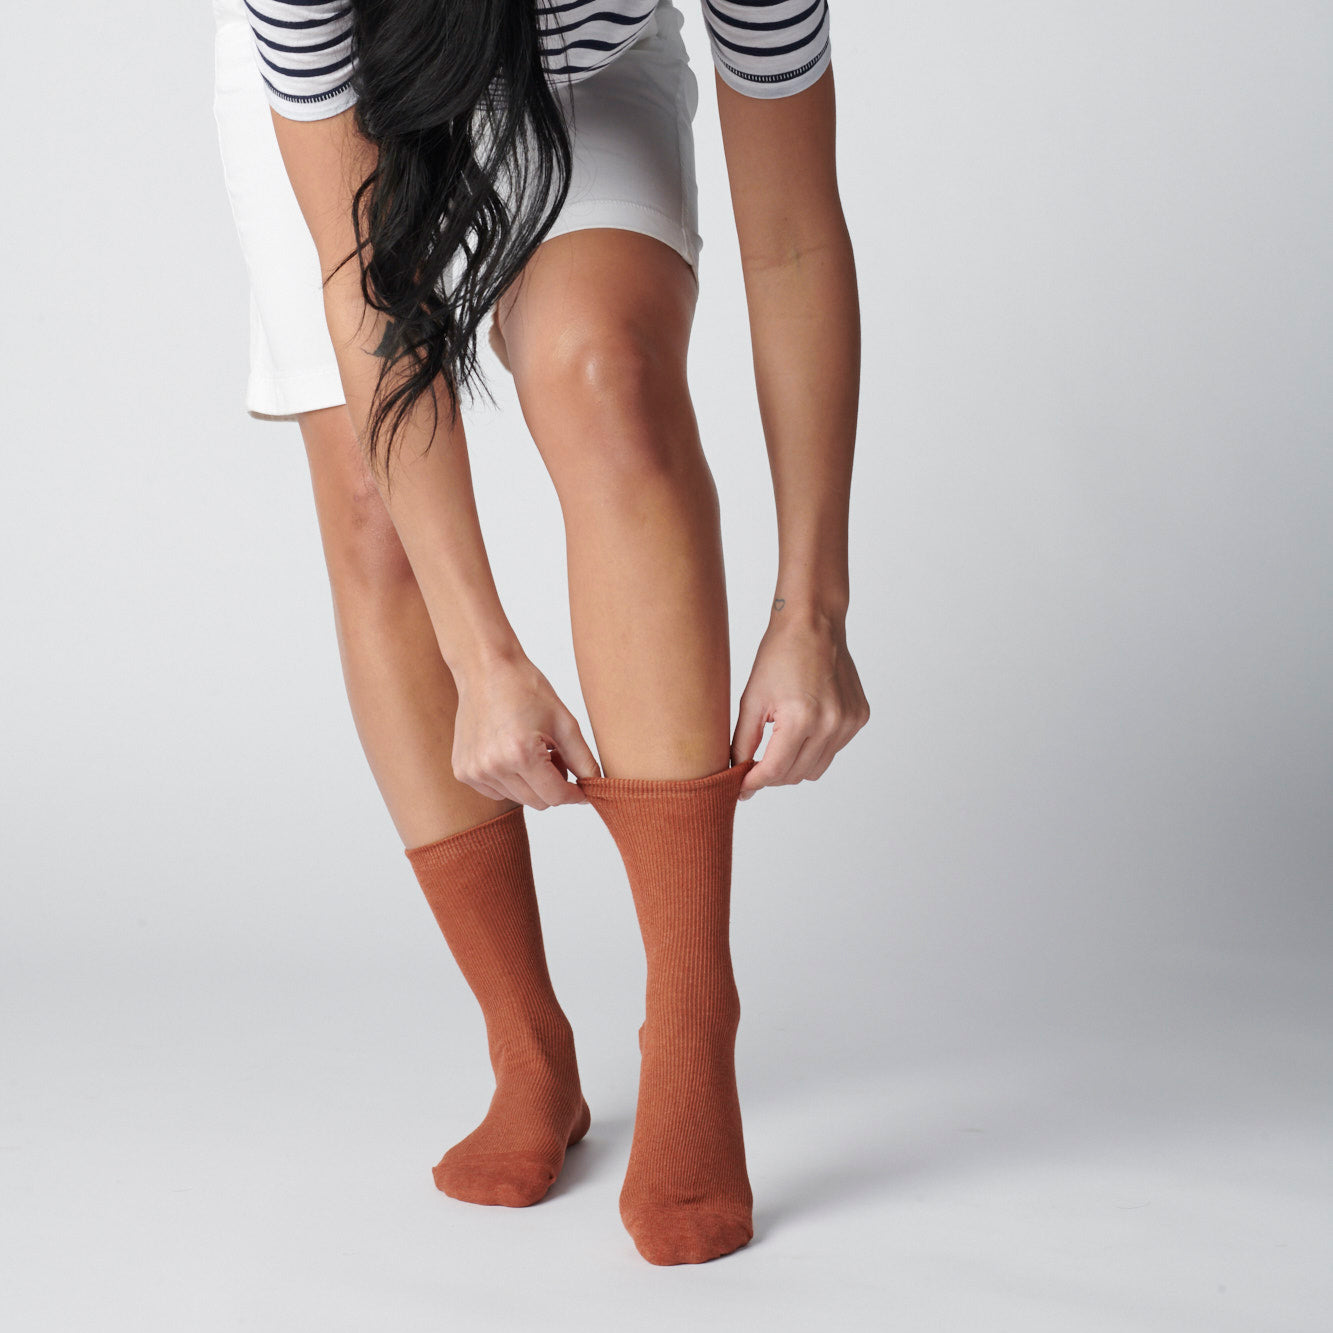 Hooray Sock Co.'s Spice Crew Socks. Everyday comfort and style in Spice Brown. Unisex, shorter crew length. 80% cotton, 20% spandex. Size: Small (Women’s 4-10).